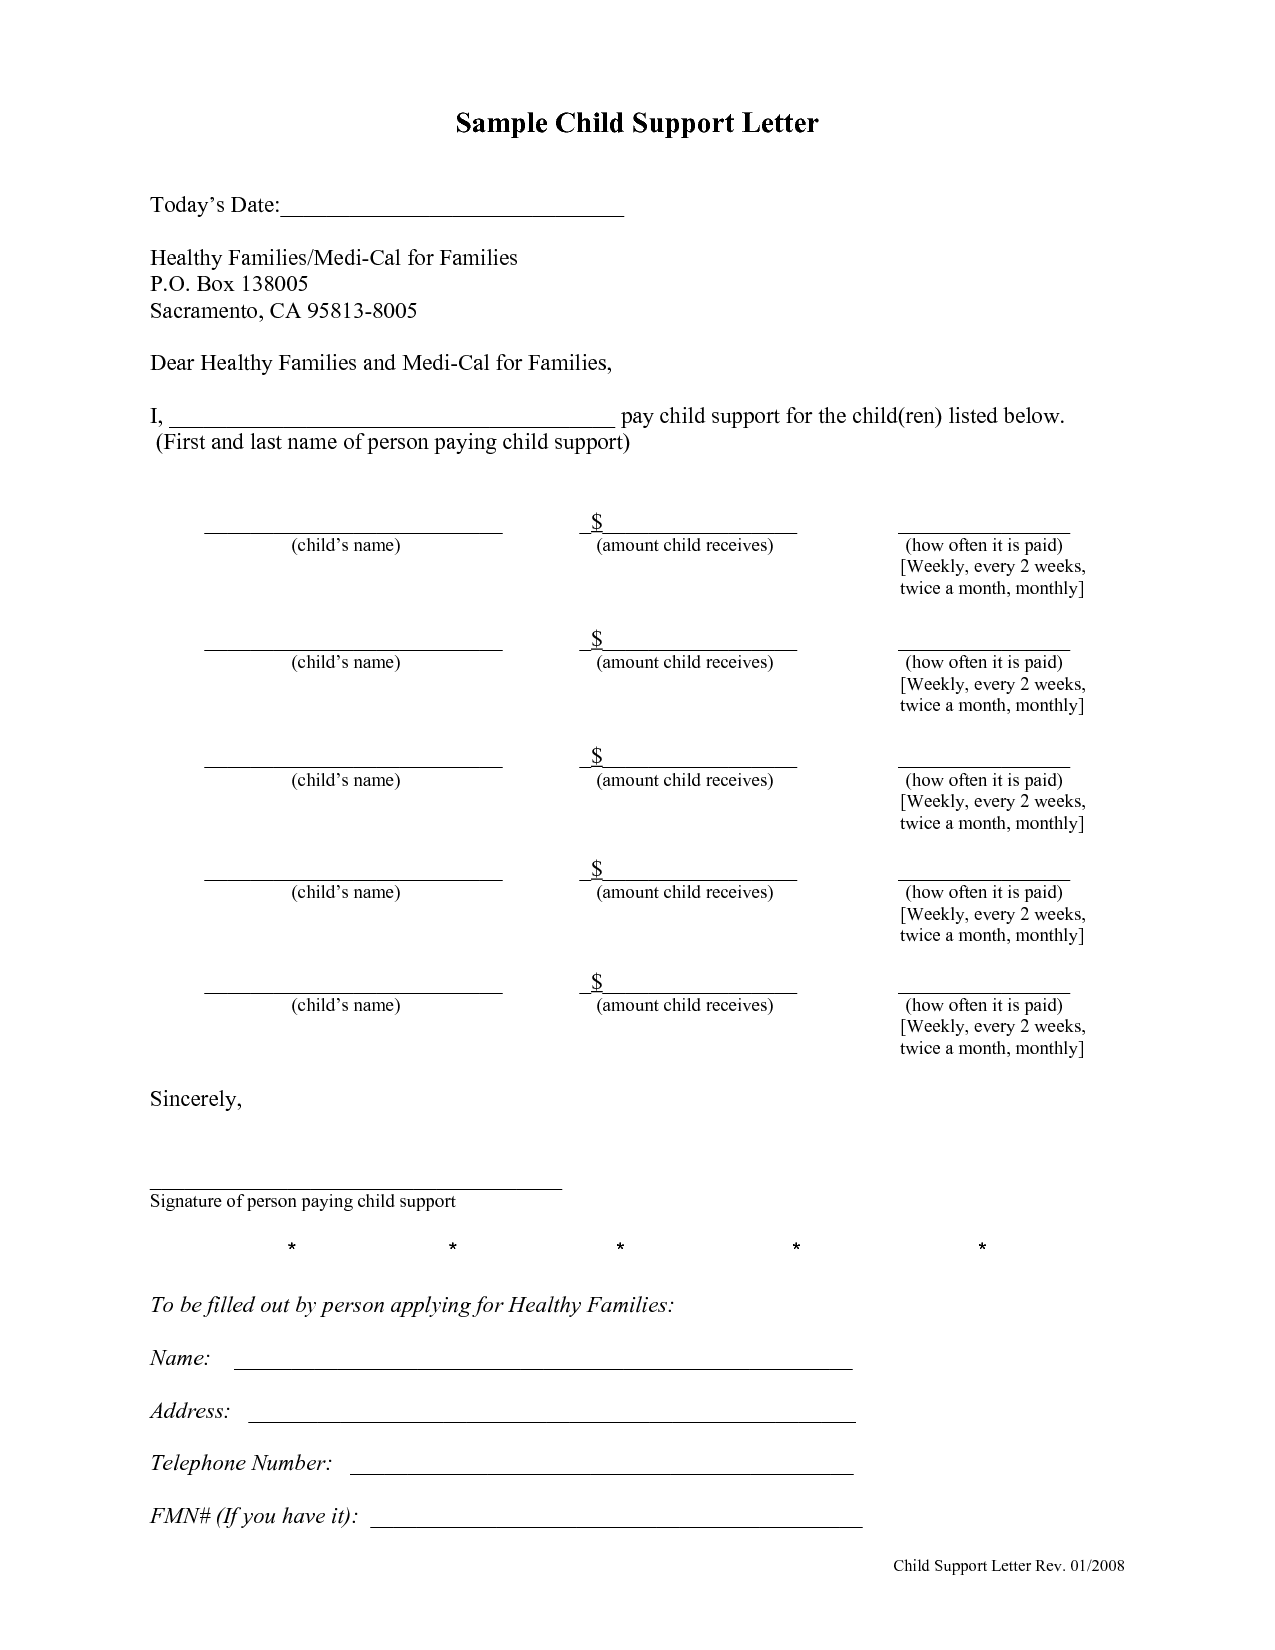 child-support-letter-free-printable-documents